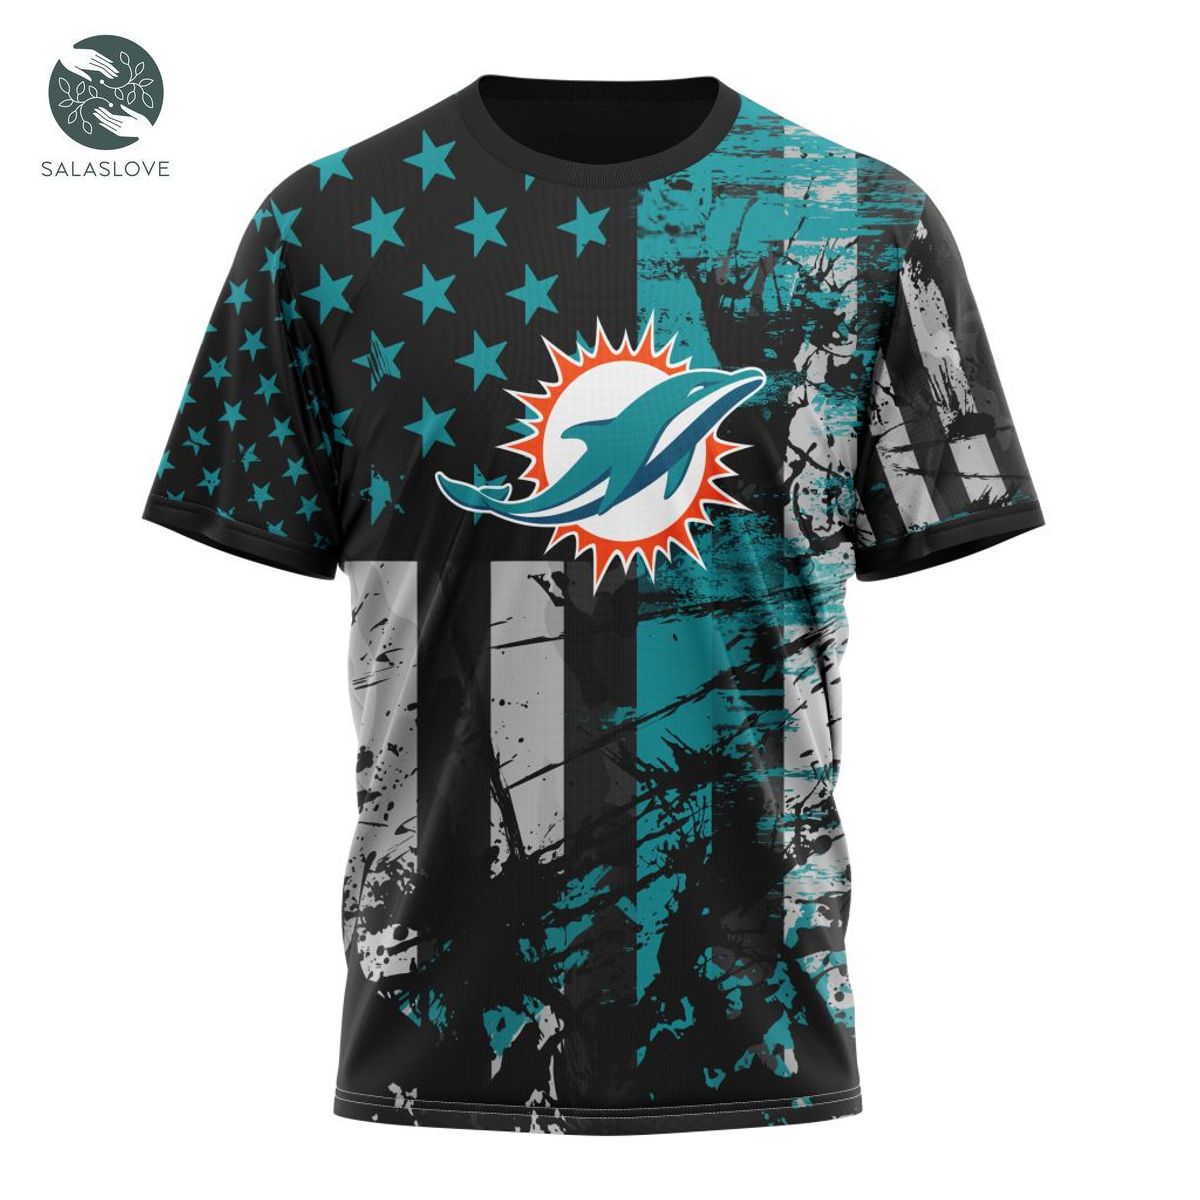 Miami Dolphins Jersey For America Shirt